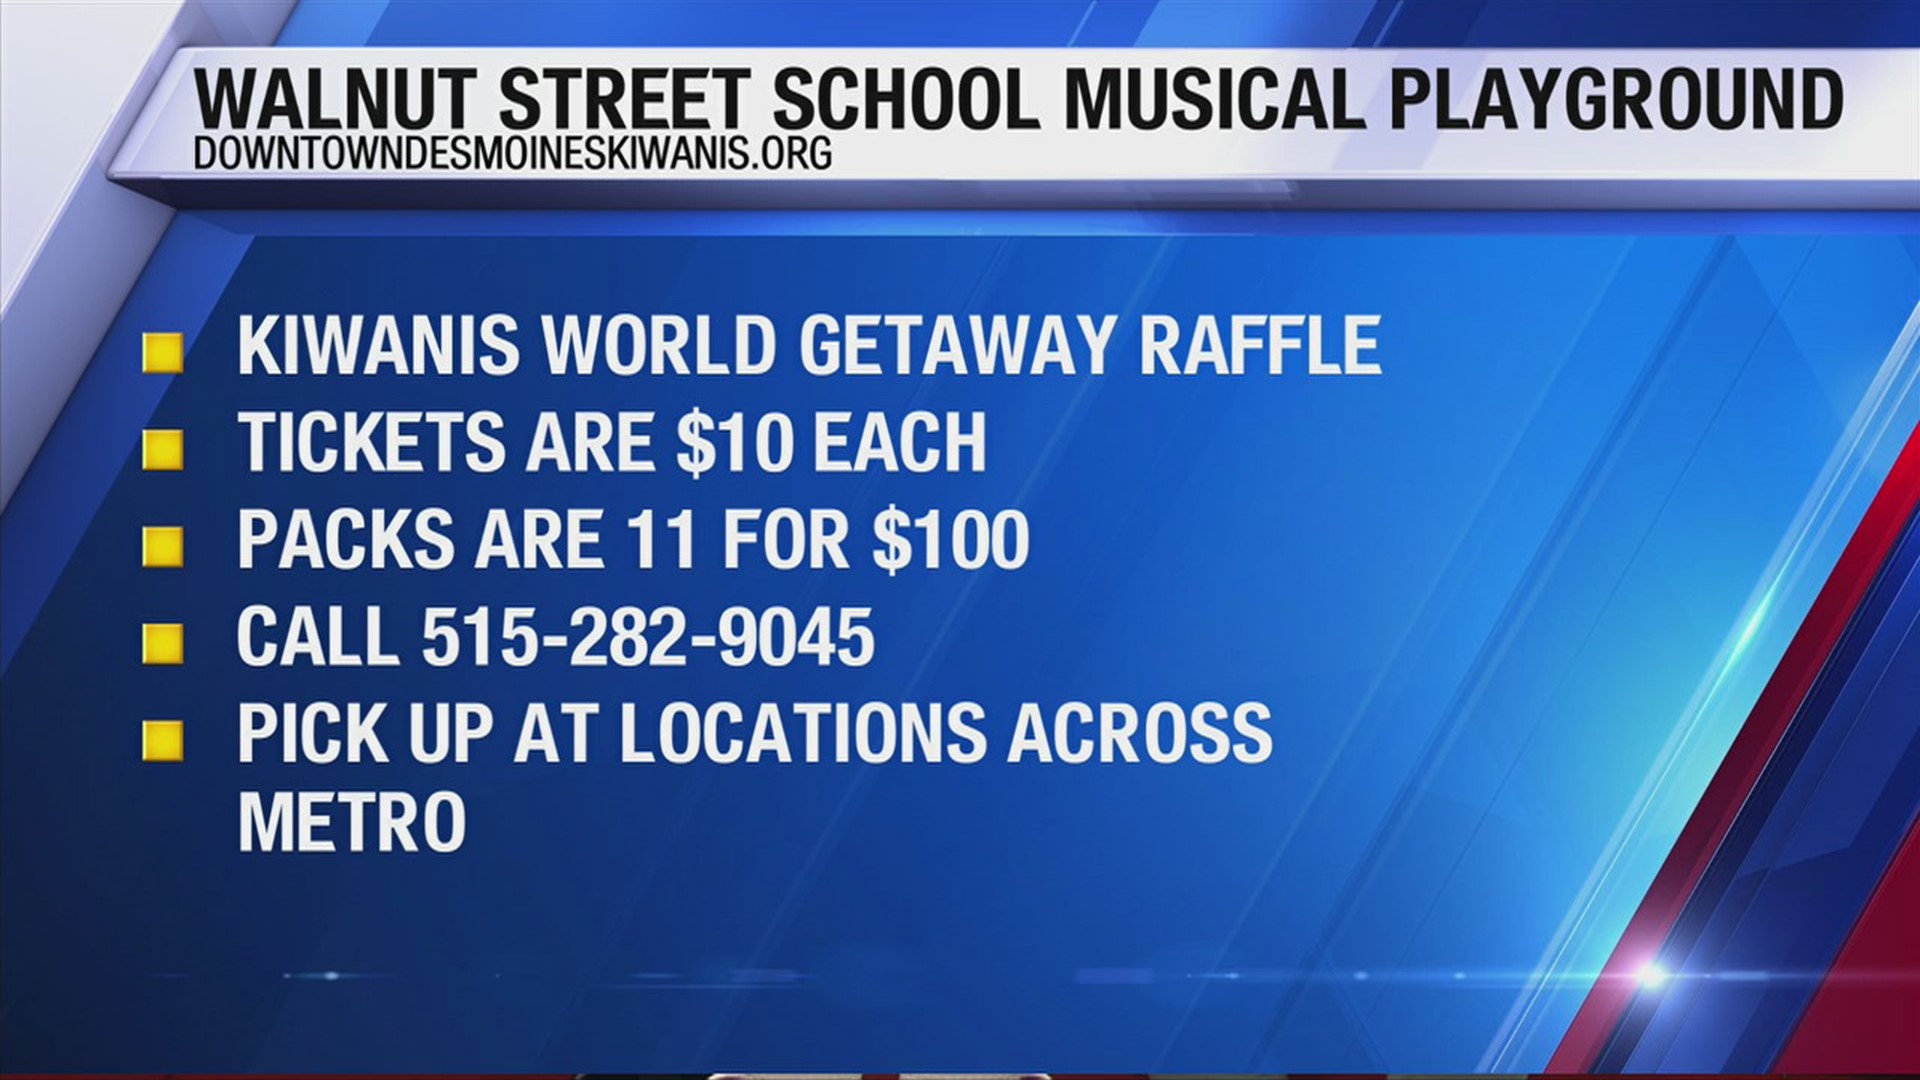 The Downtown Des Moines Kiwanis Club is looking for your help to bring a musical playground to Walnut Street School.